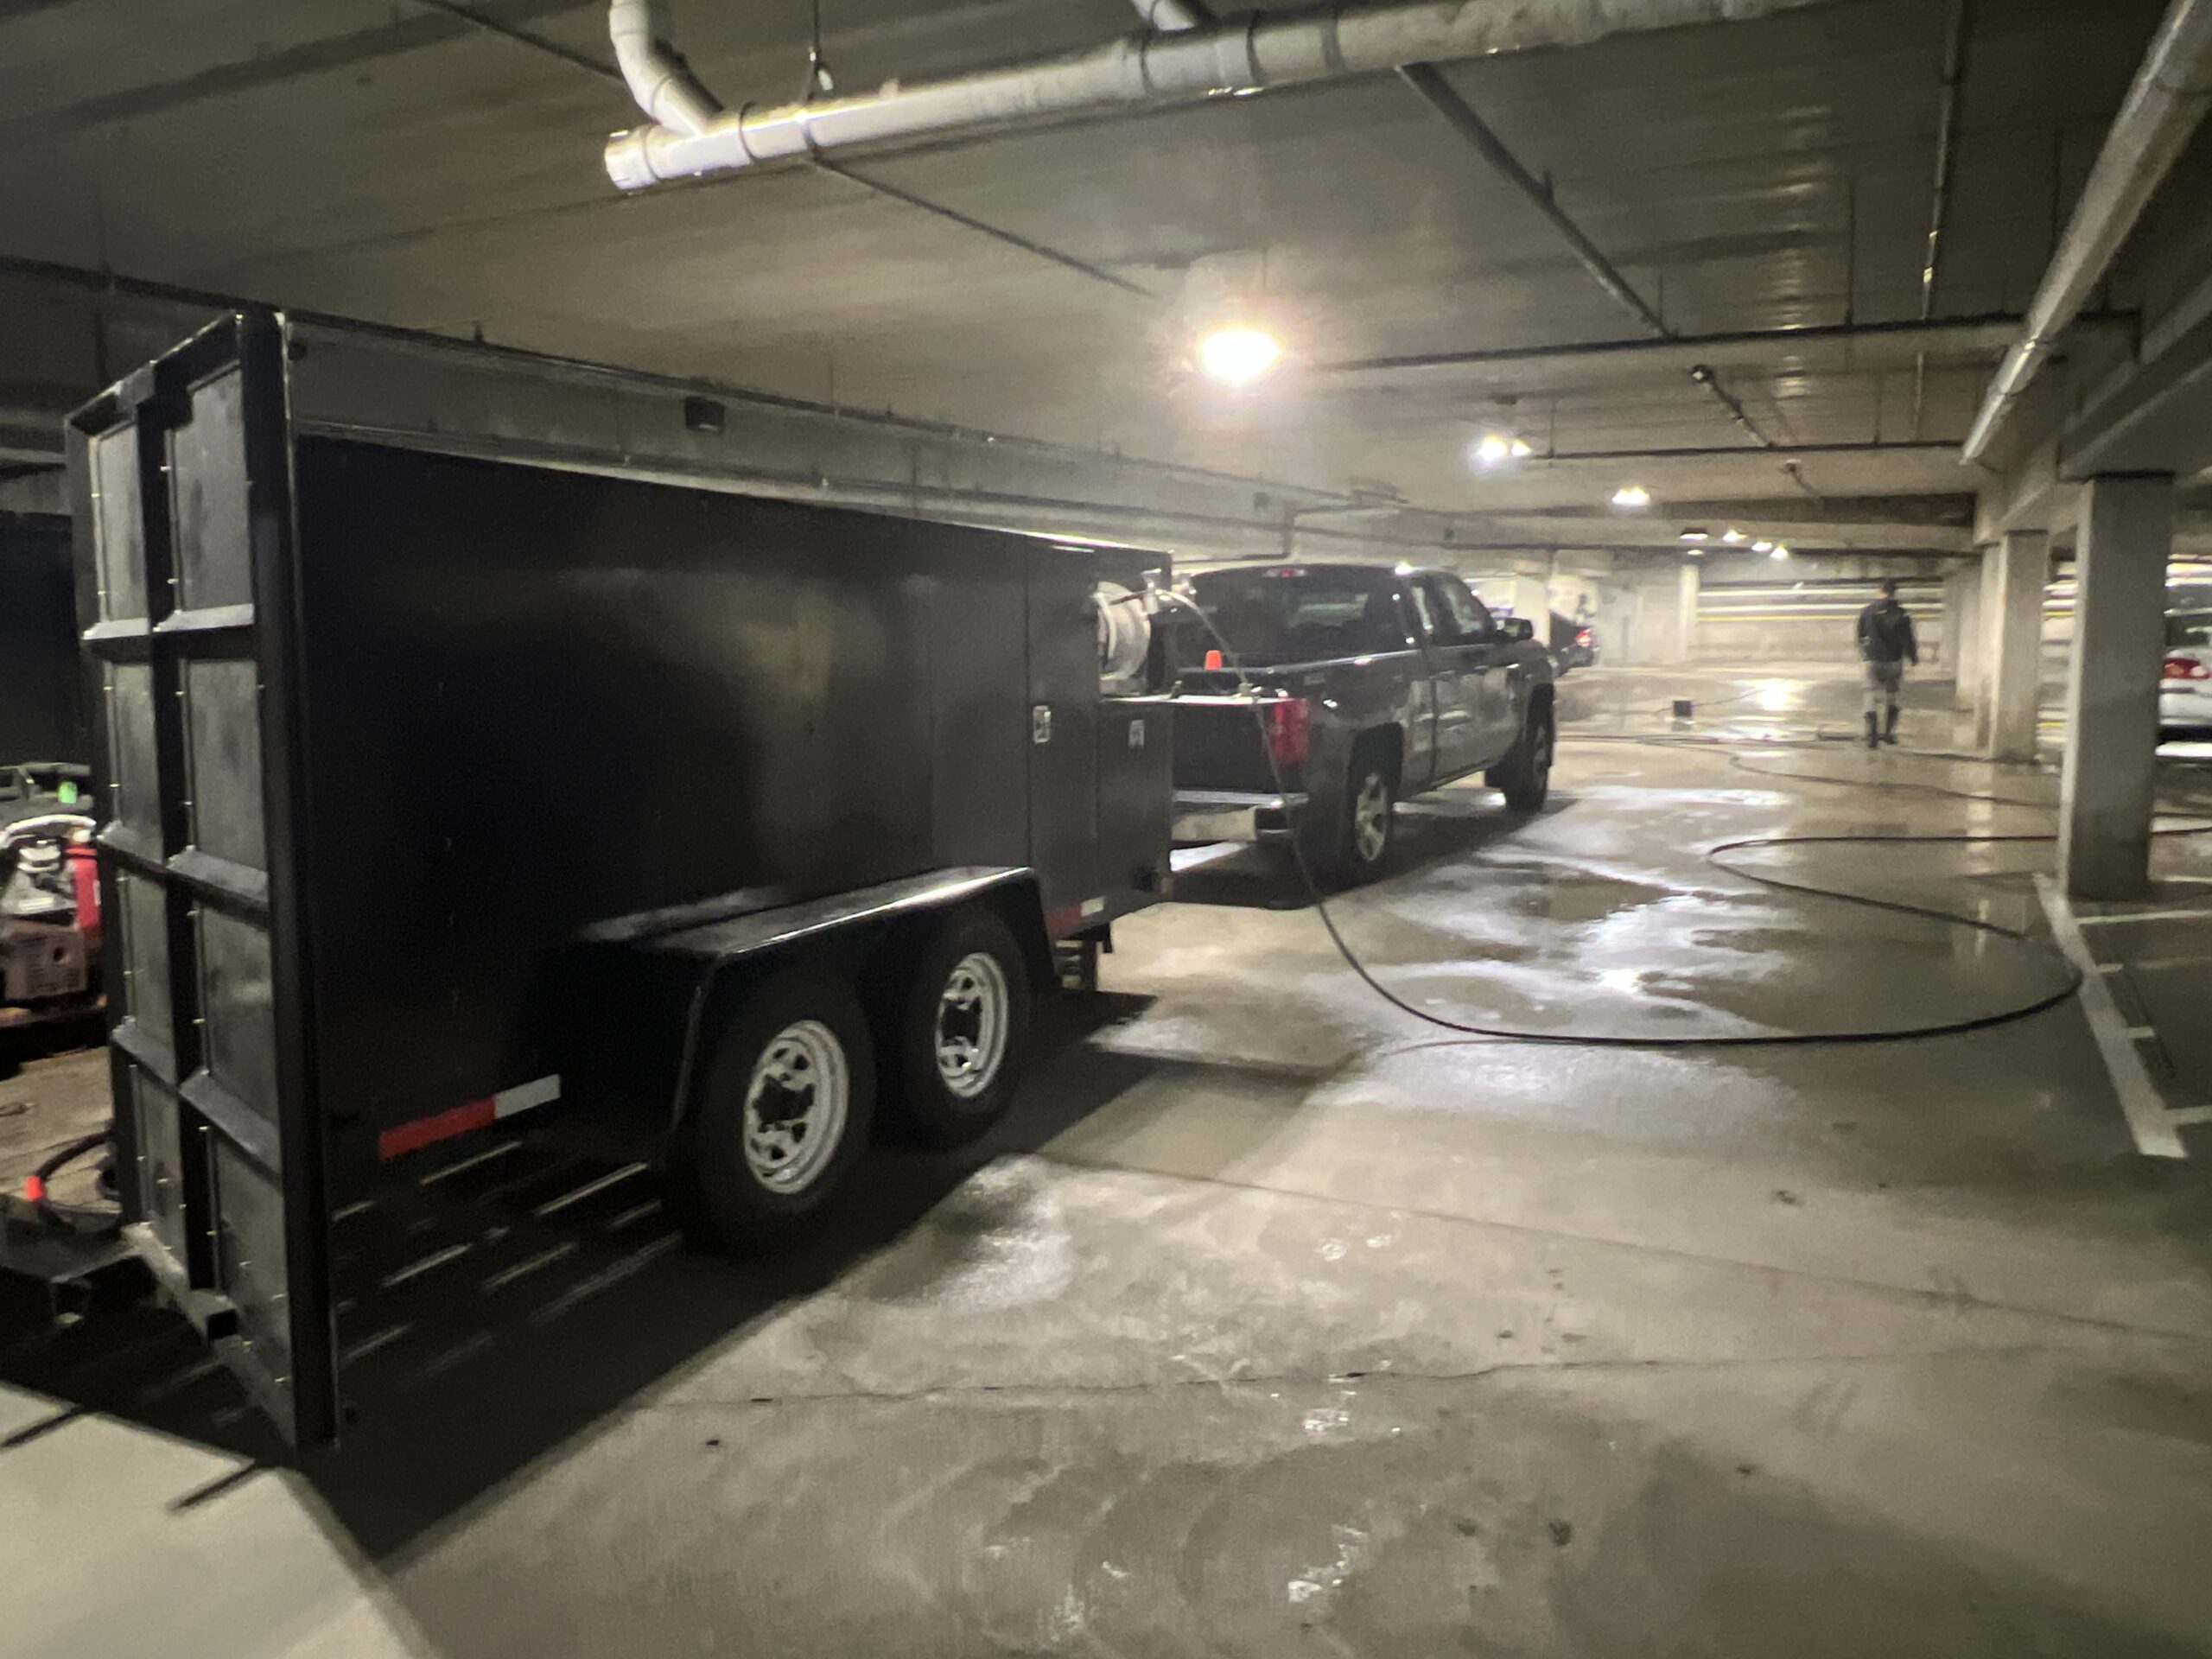 our garage cleaning power washing setup. Let OFF THE WALL preform your parking garage cleaning in ct, ma and ri